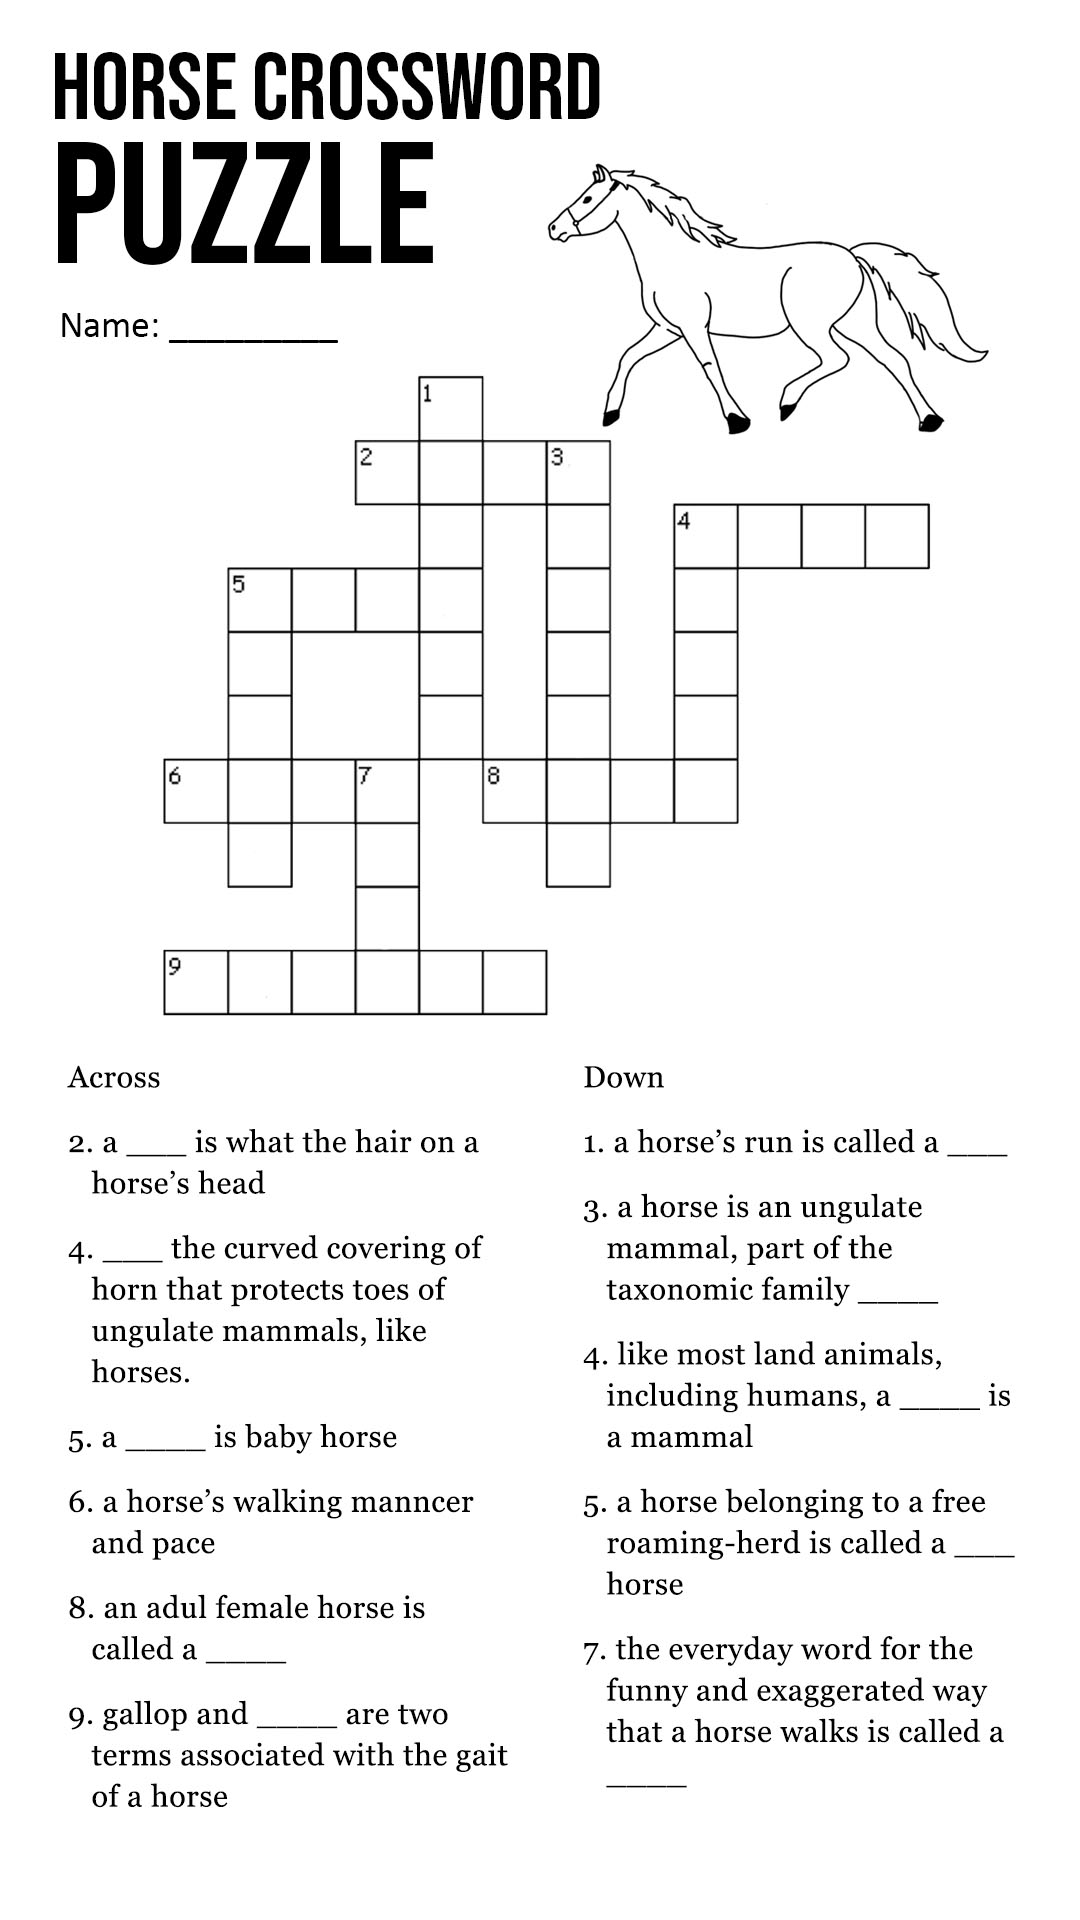 Horse Crossword Puzzle for Kids Image